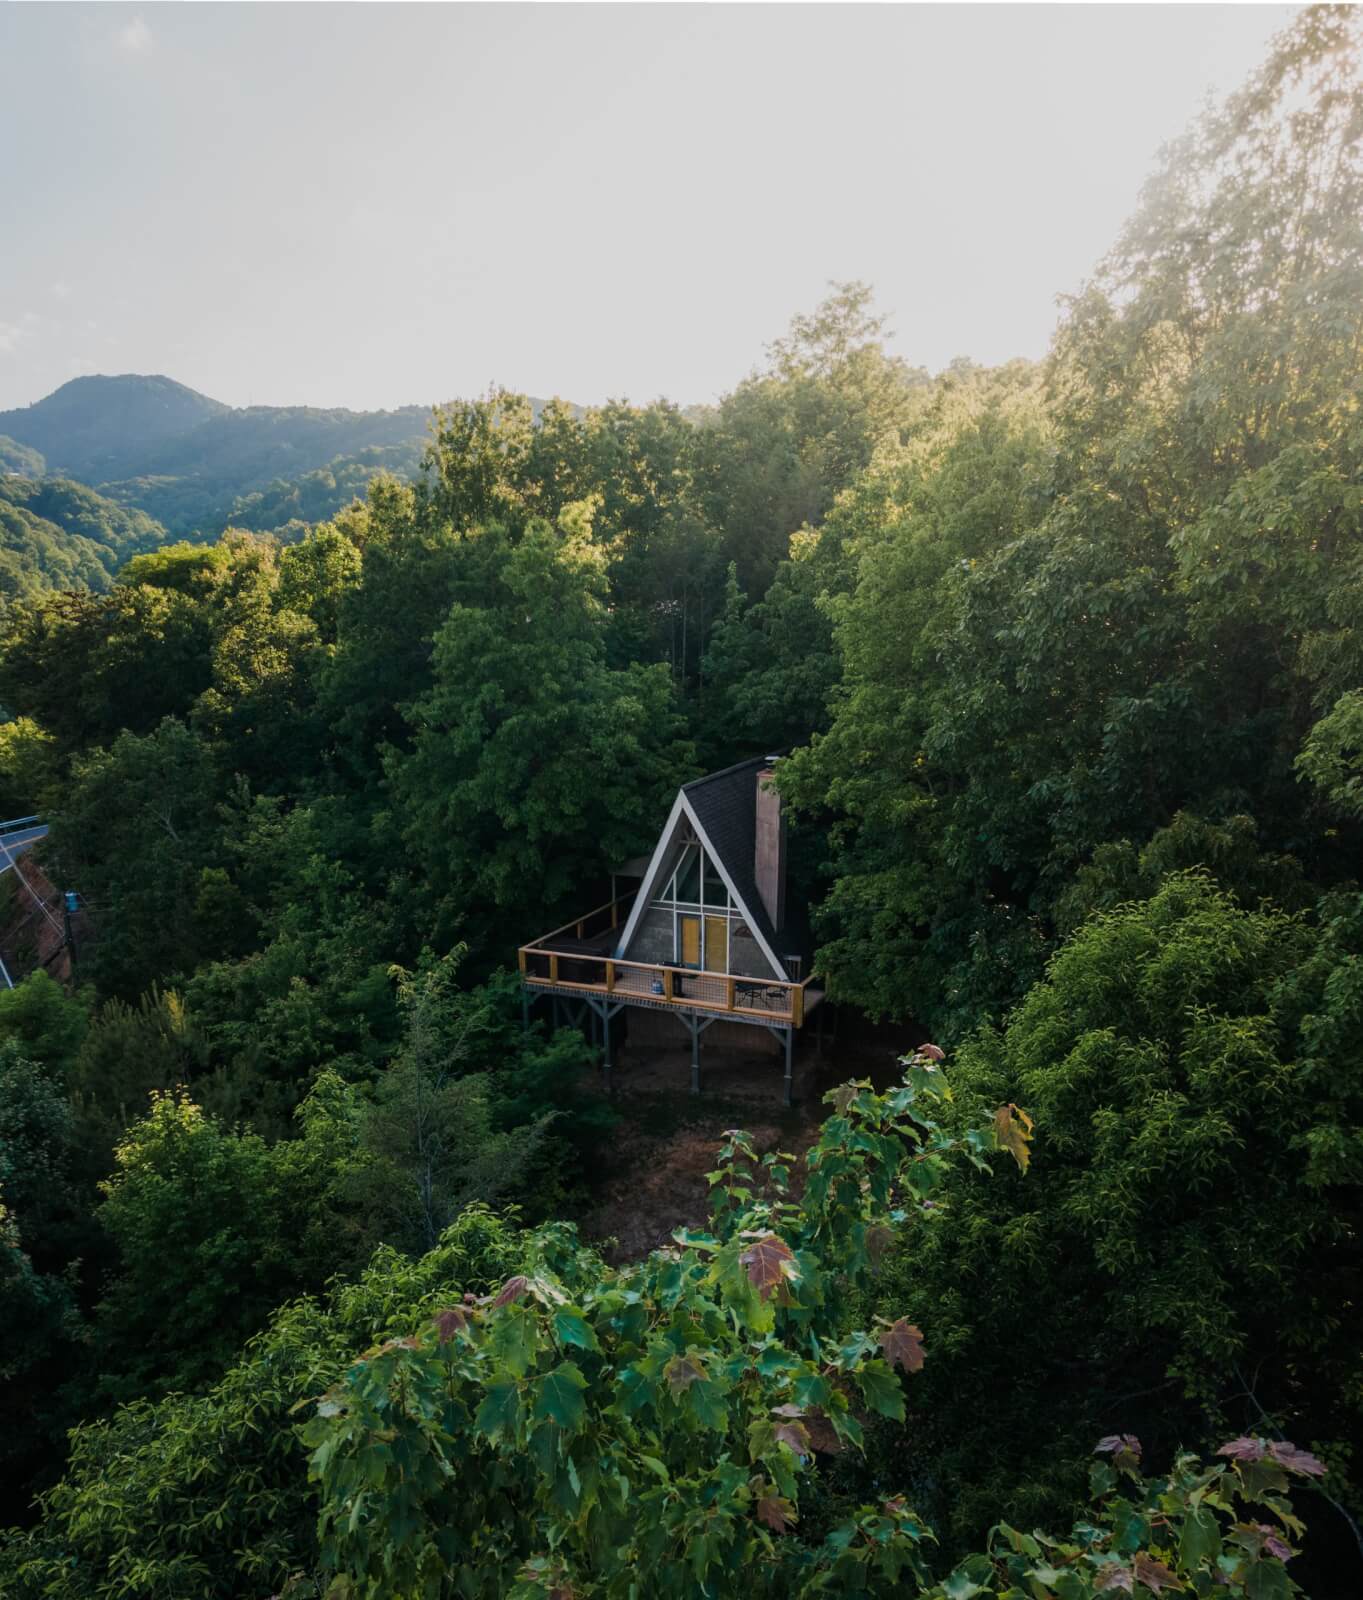 Treetop cabin nestled in the Smoky Mountains.